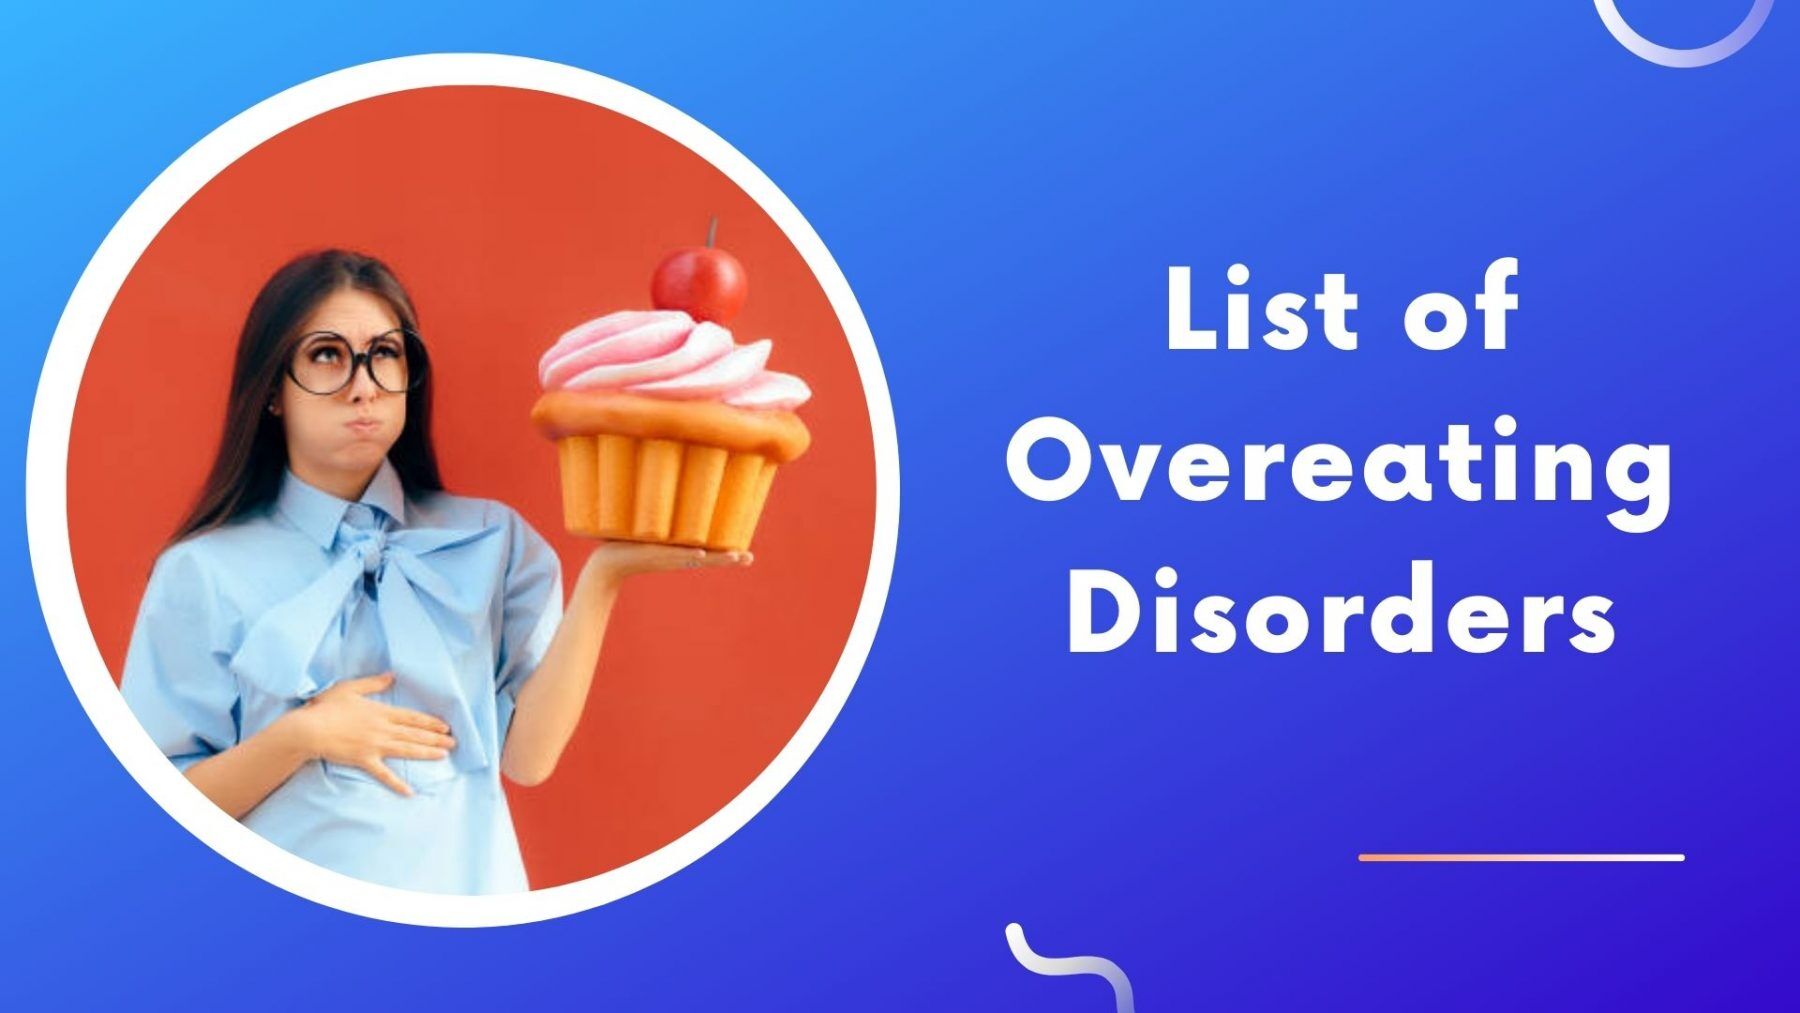 Overeating Disorders